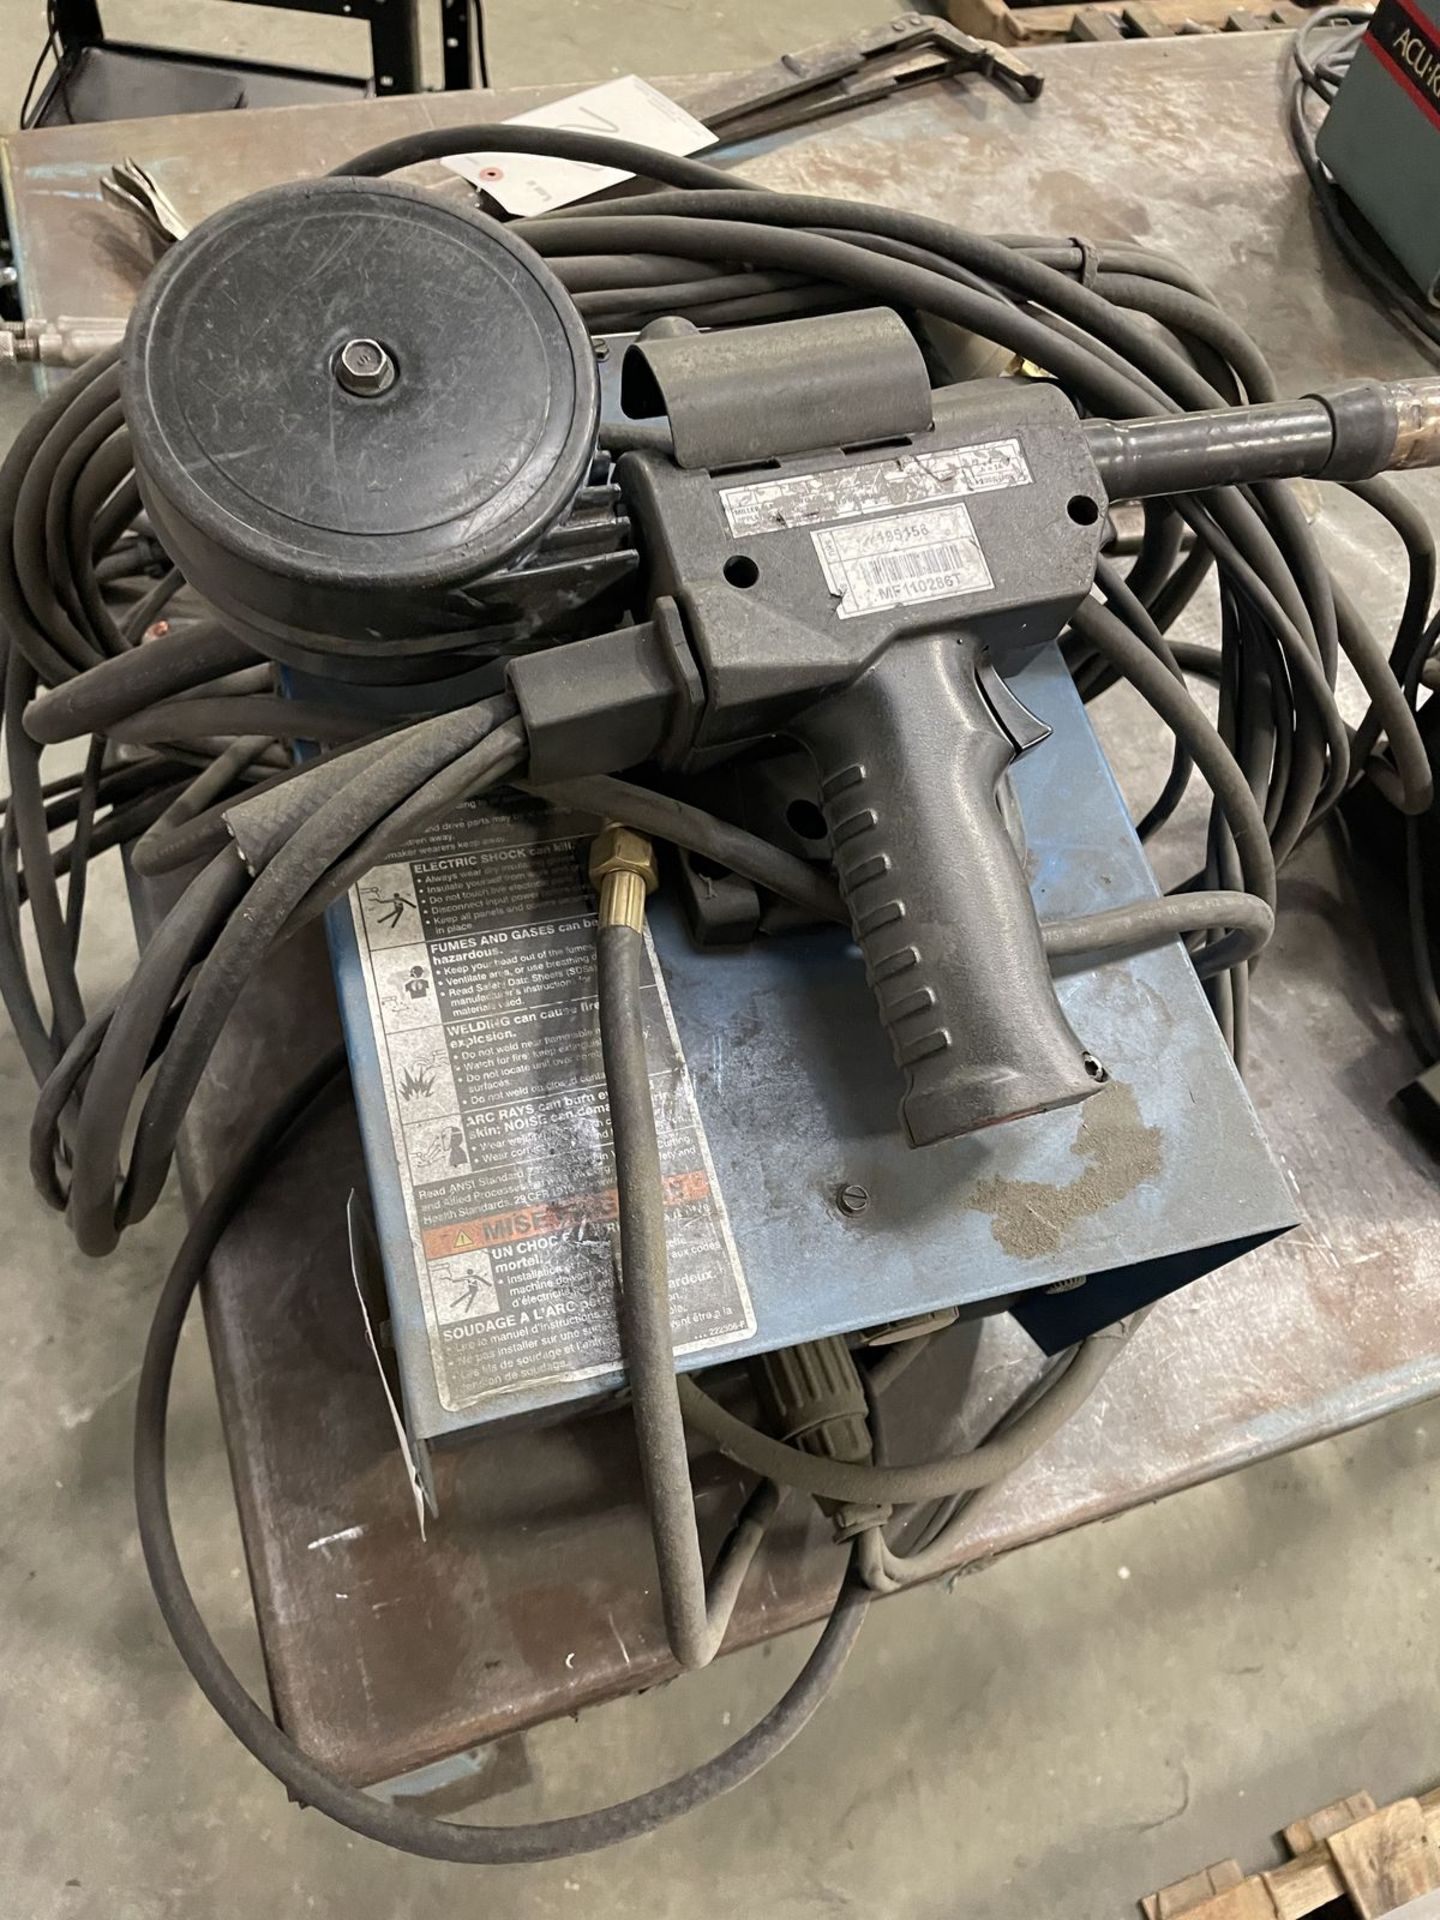 Miller WC-115A Weld Control with Weld Gun - Image 2 of 2